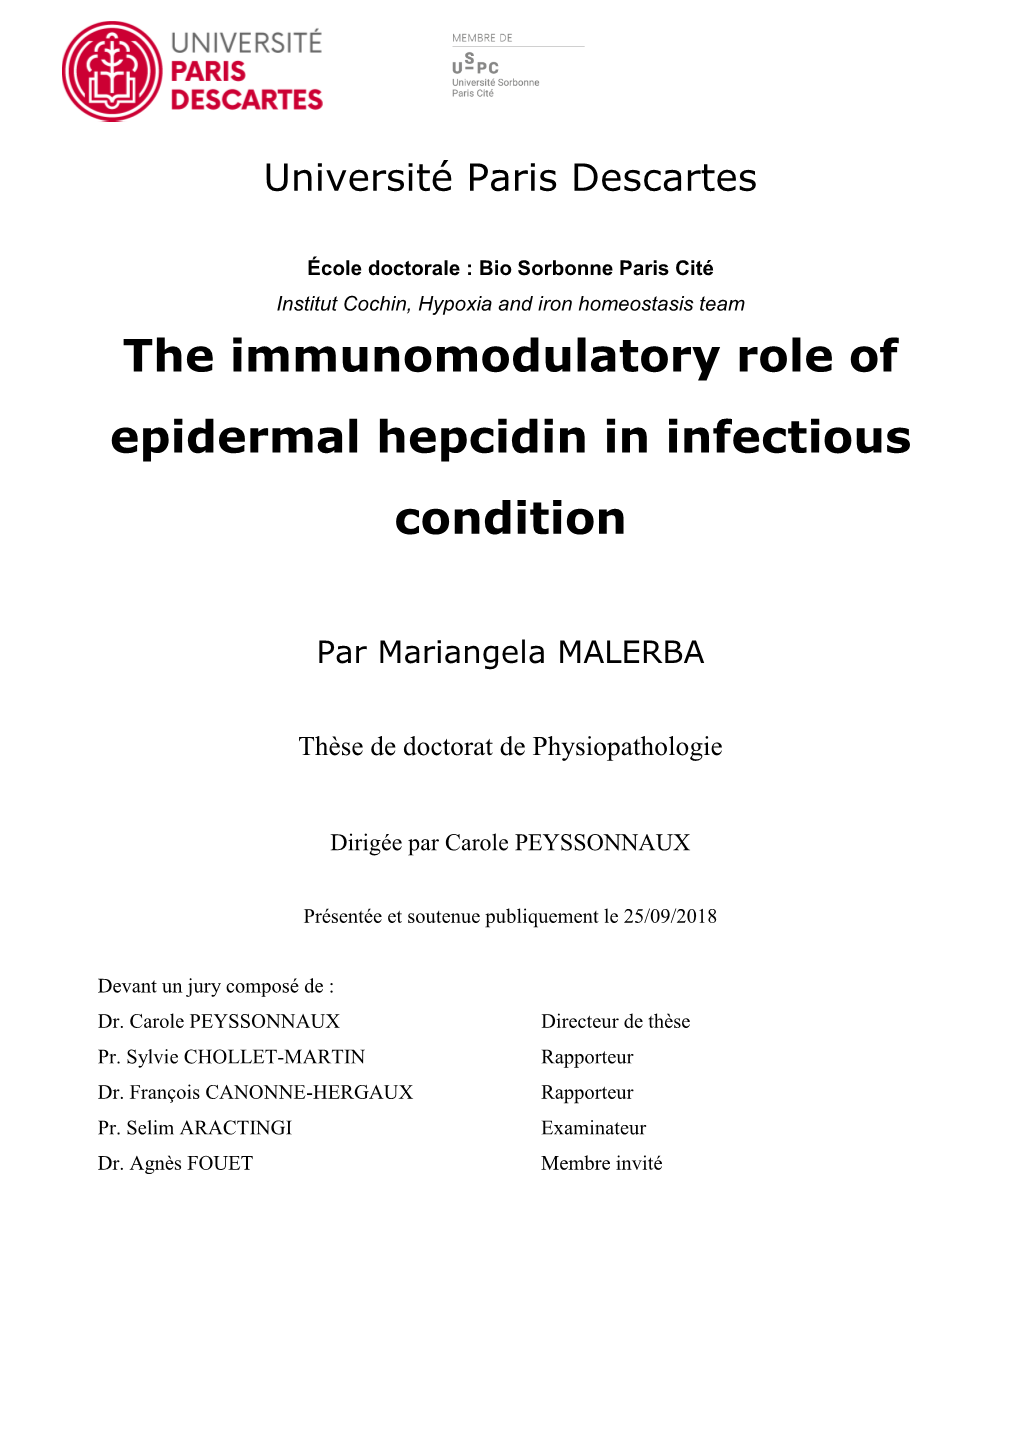 The Immunomodulatory Role of Epidermal Hepcidin in Infectious Condition